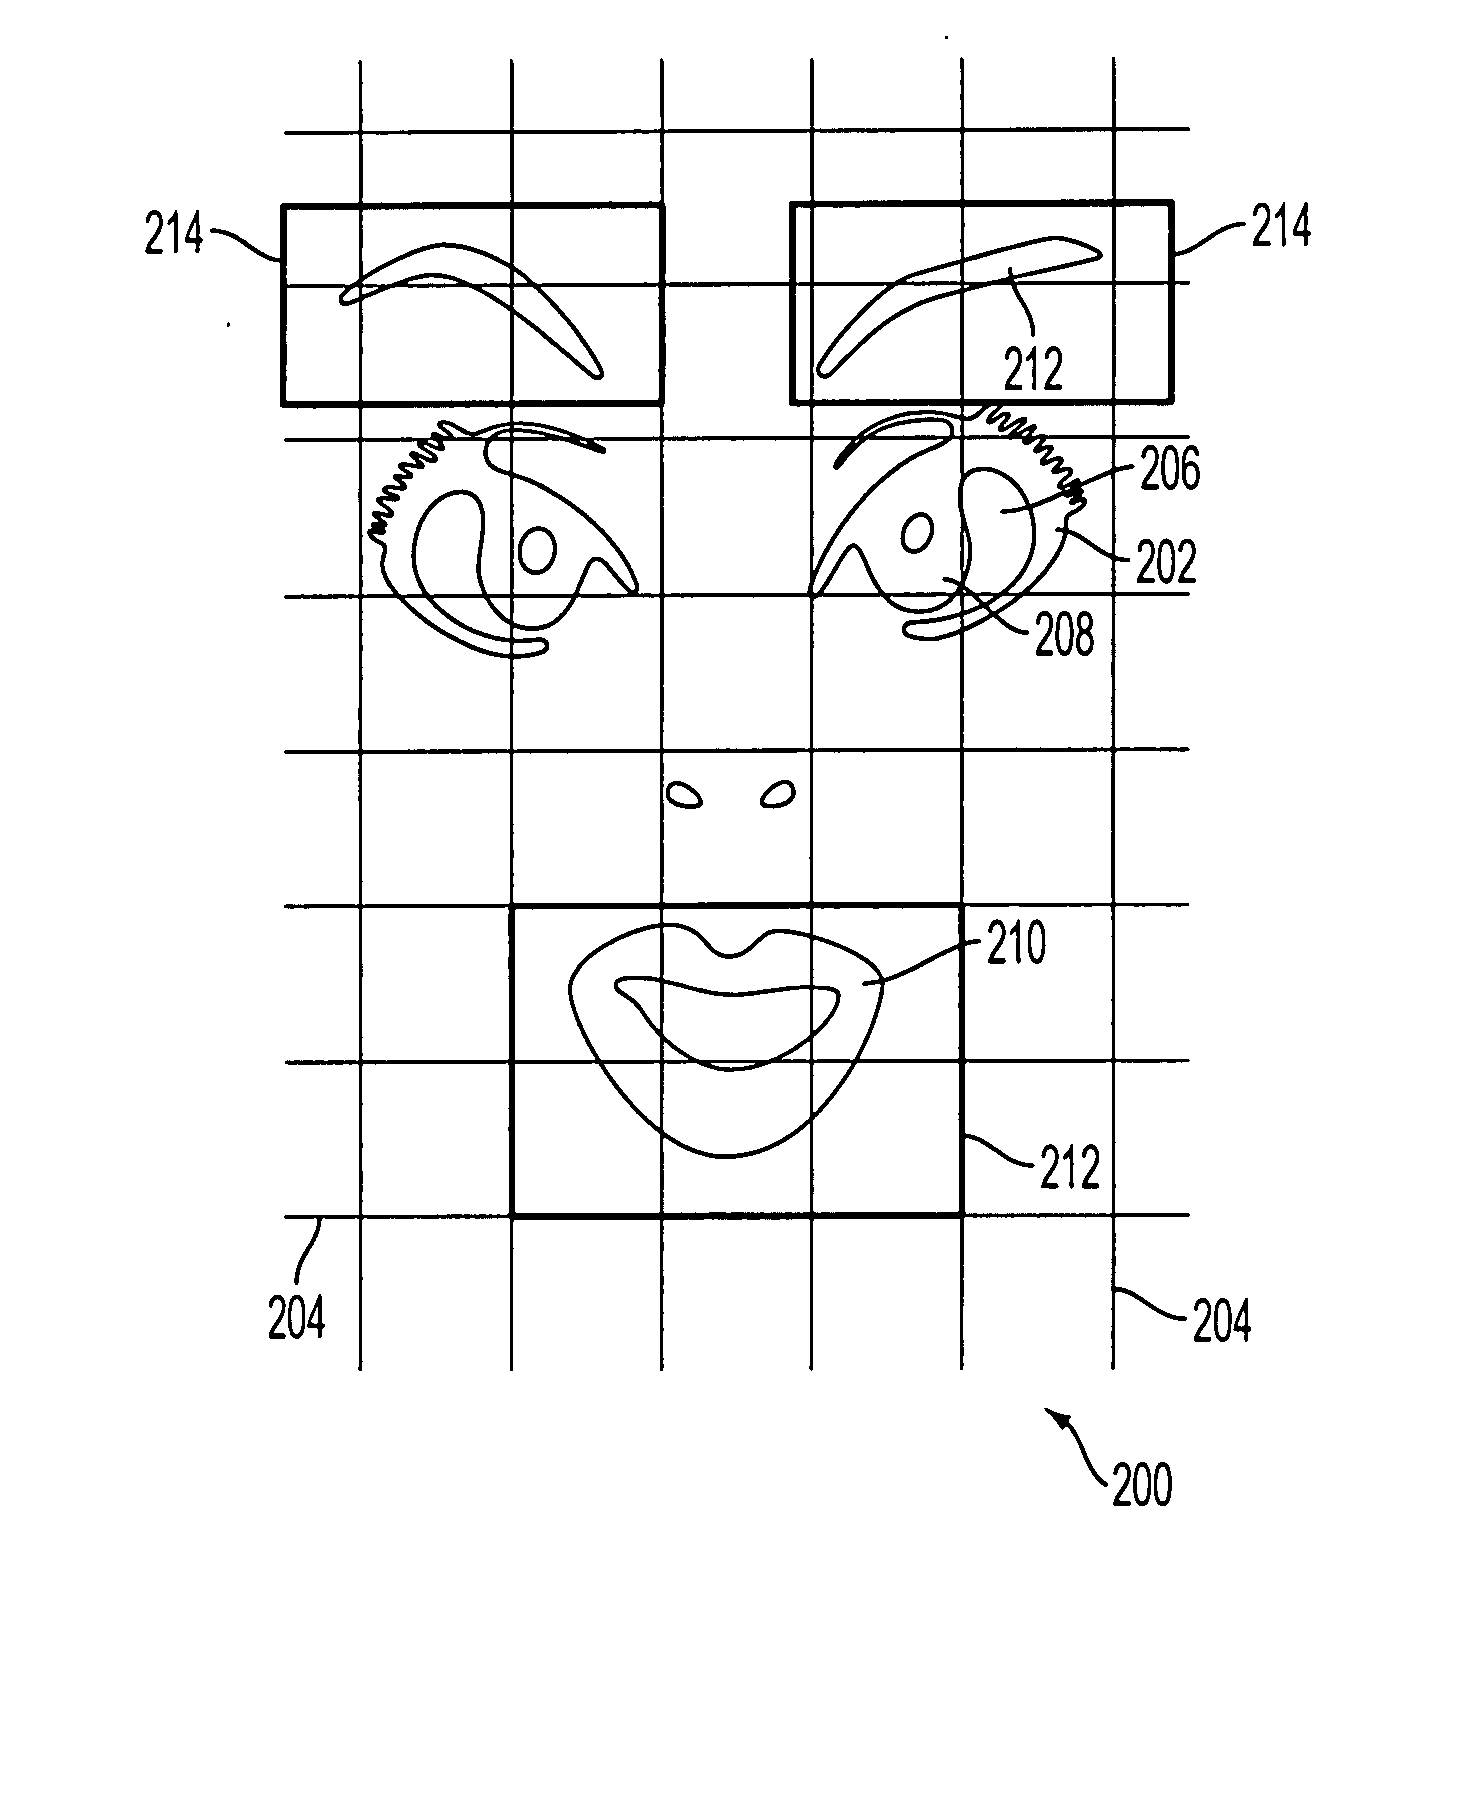 Methods and systems for processing an interchange of real time effects during video communication